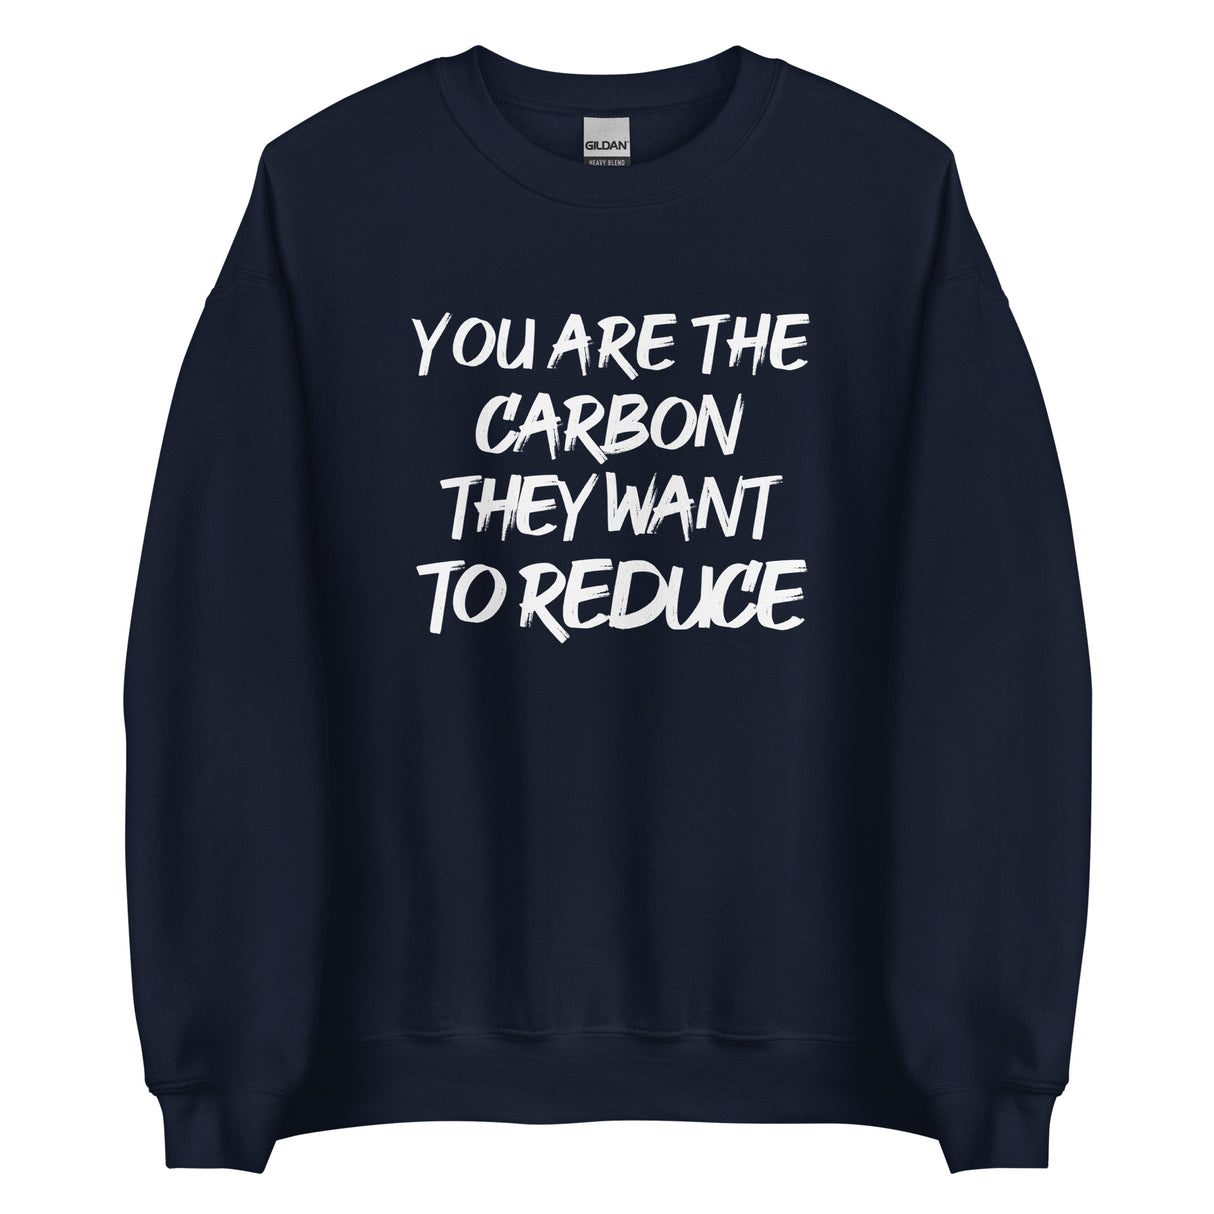 You Are The Carbon They Want to Reduce Sweatshirt